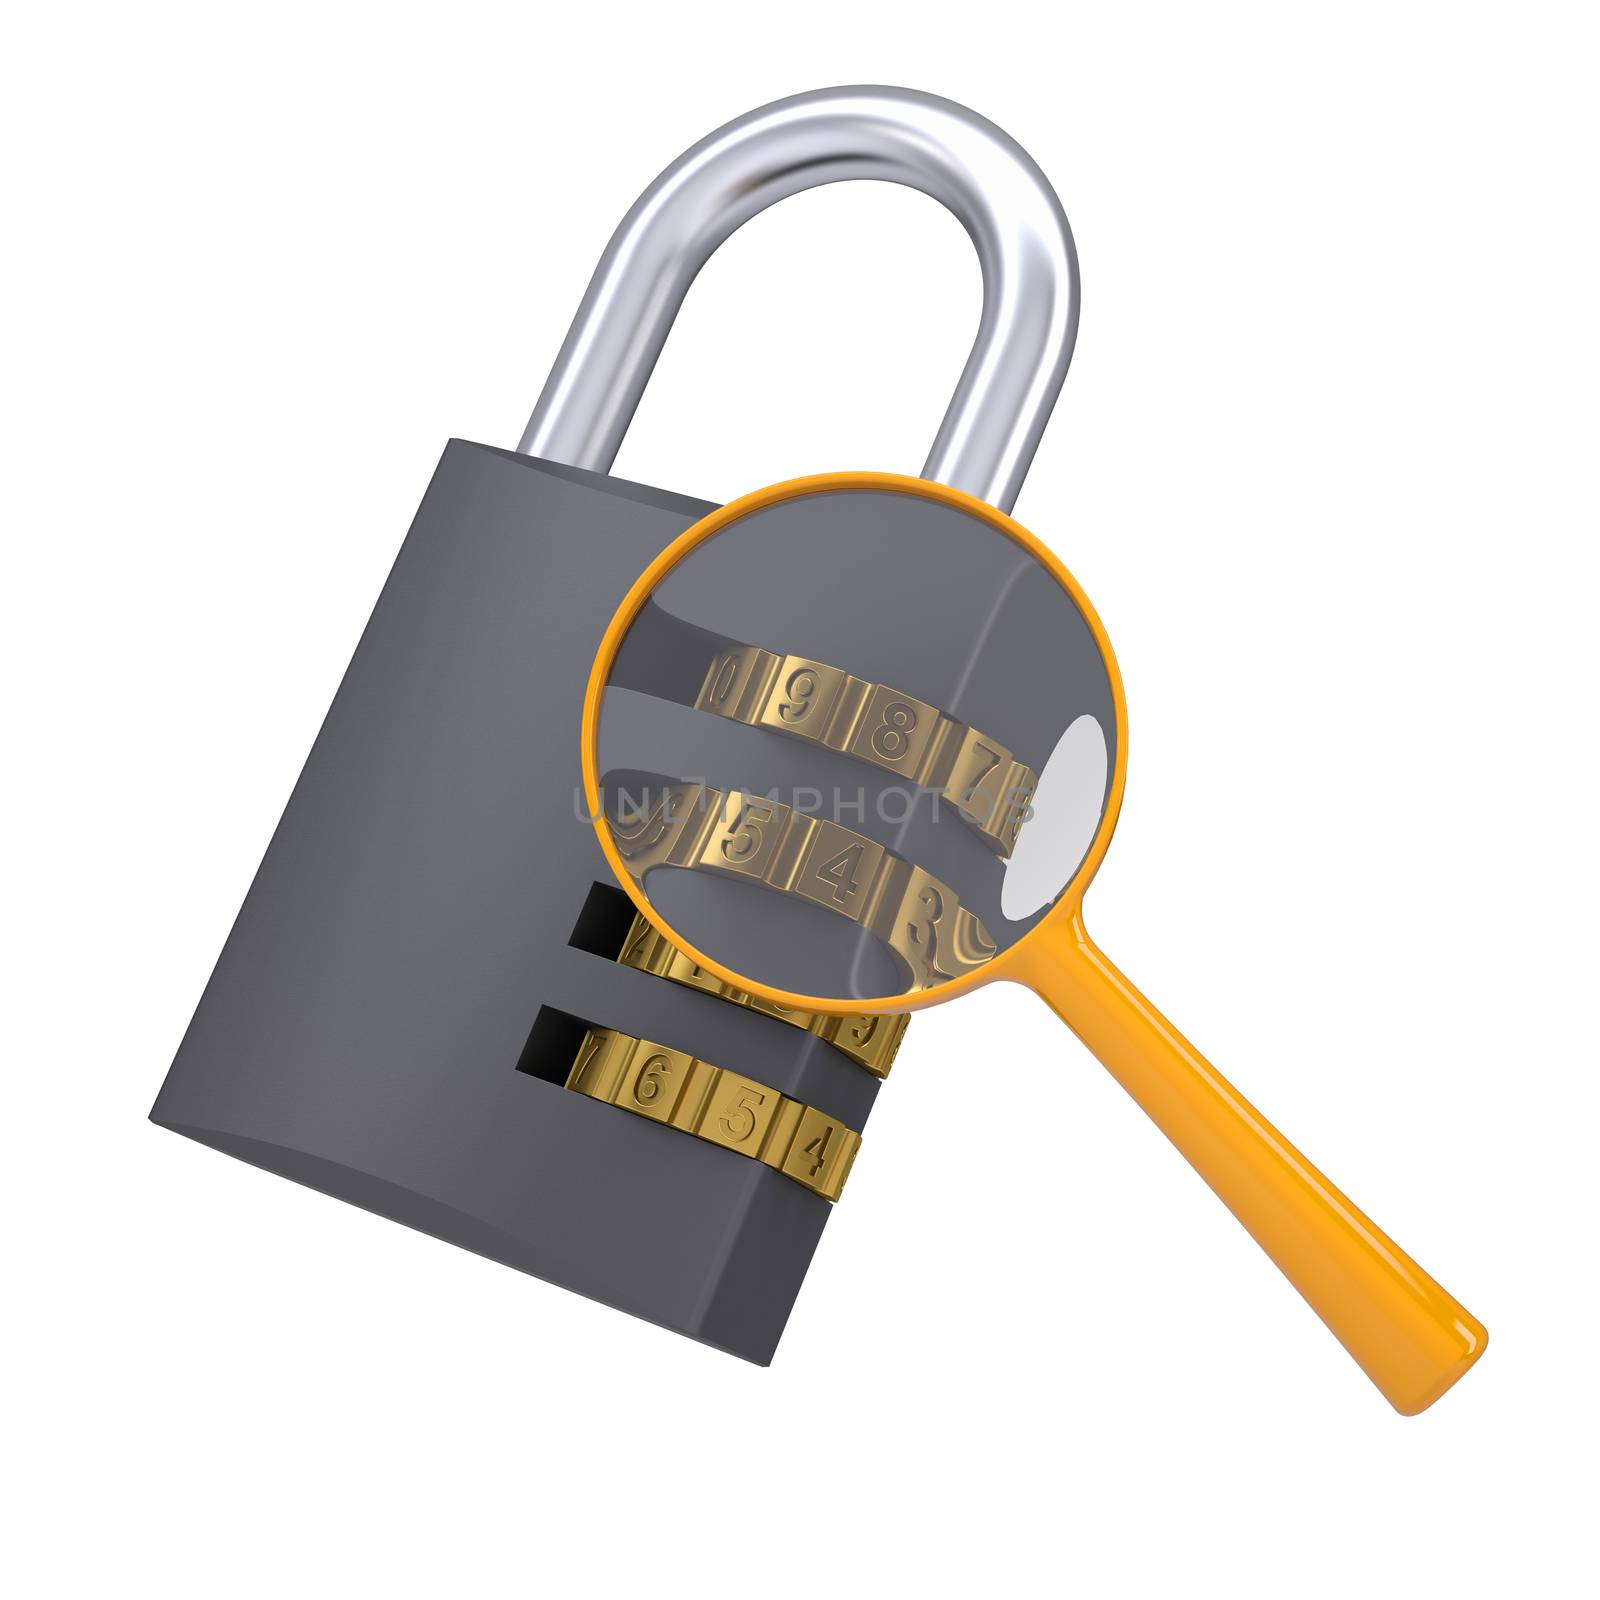 Analysis of security lock code. Isolated render on a white background